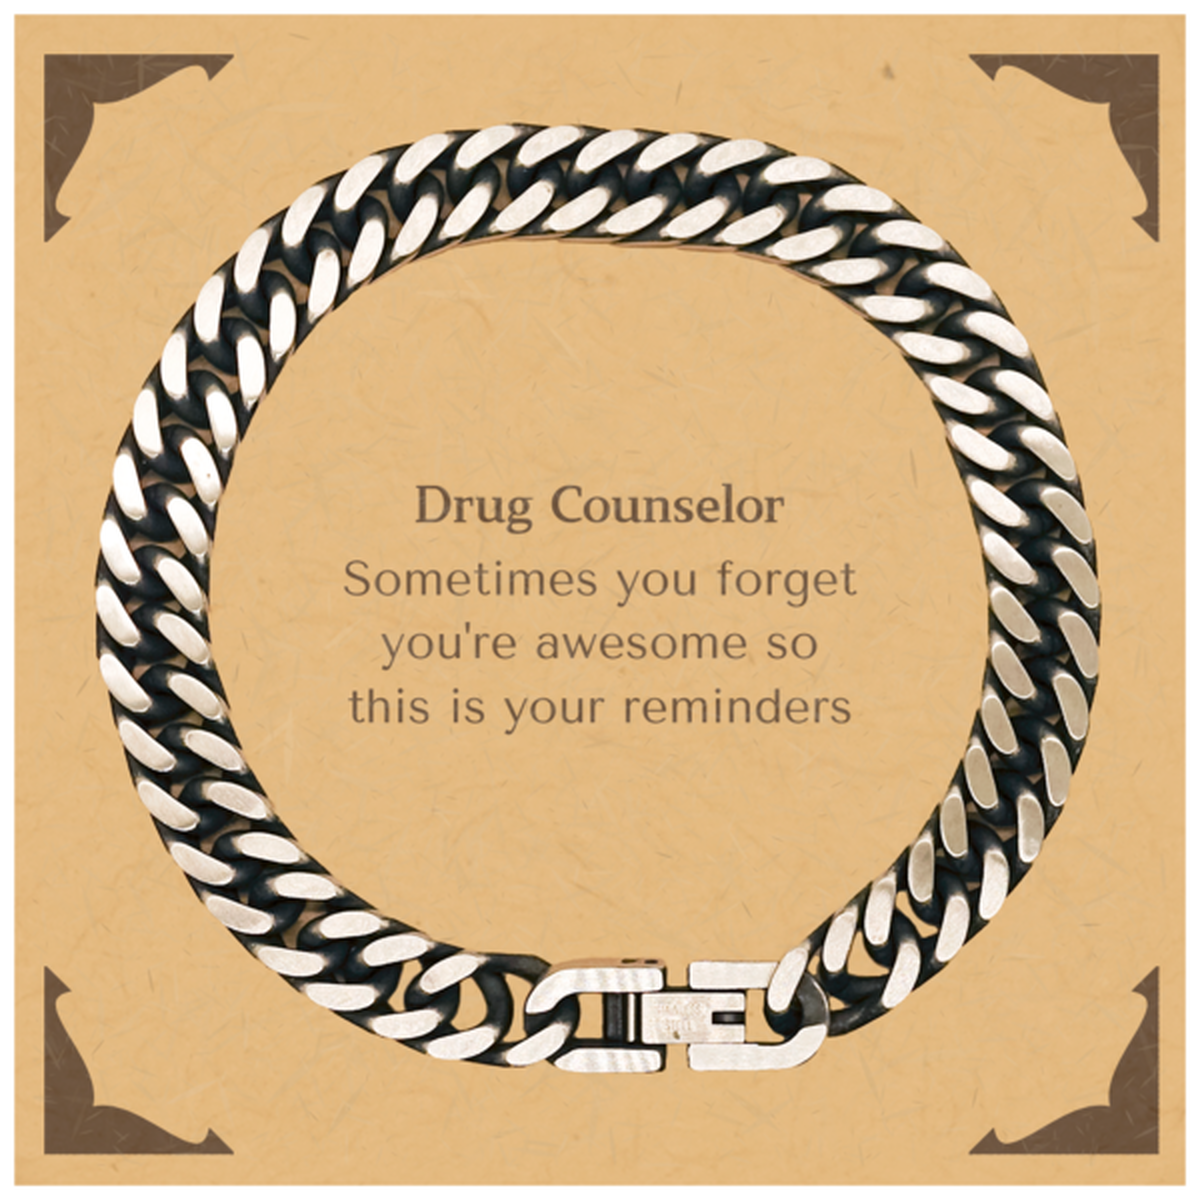 Sentimental Drug Counselor Cuban Link Chain Bracelet, Drug Counselor Sometimes you forget you're awesome so this is your reminders, Graduation Christmas Birthday Gifts for Drug Counselor, Men, Women, Coworkers